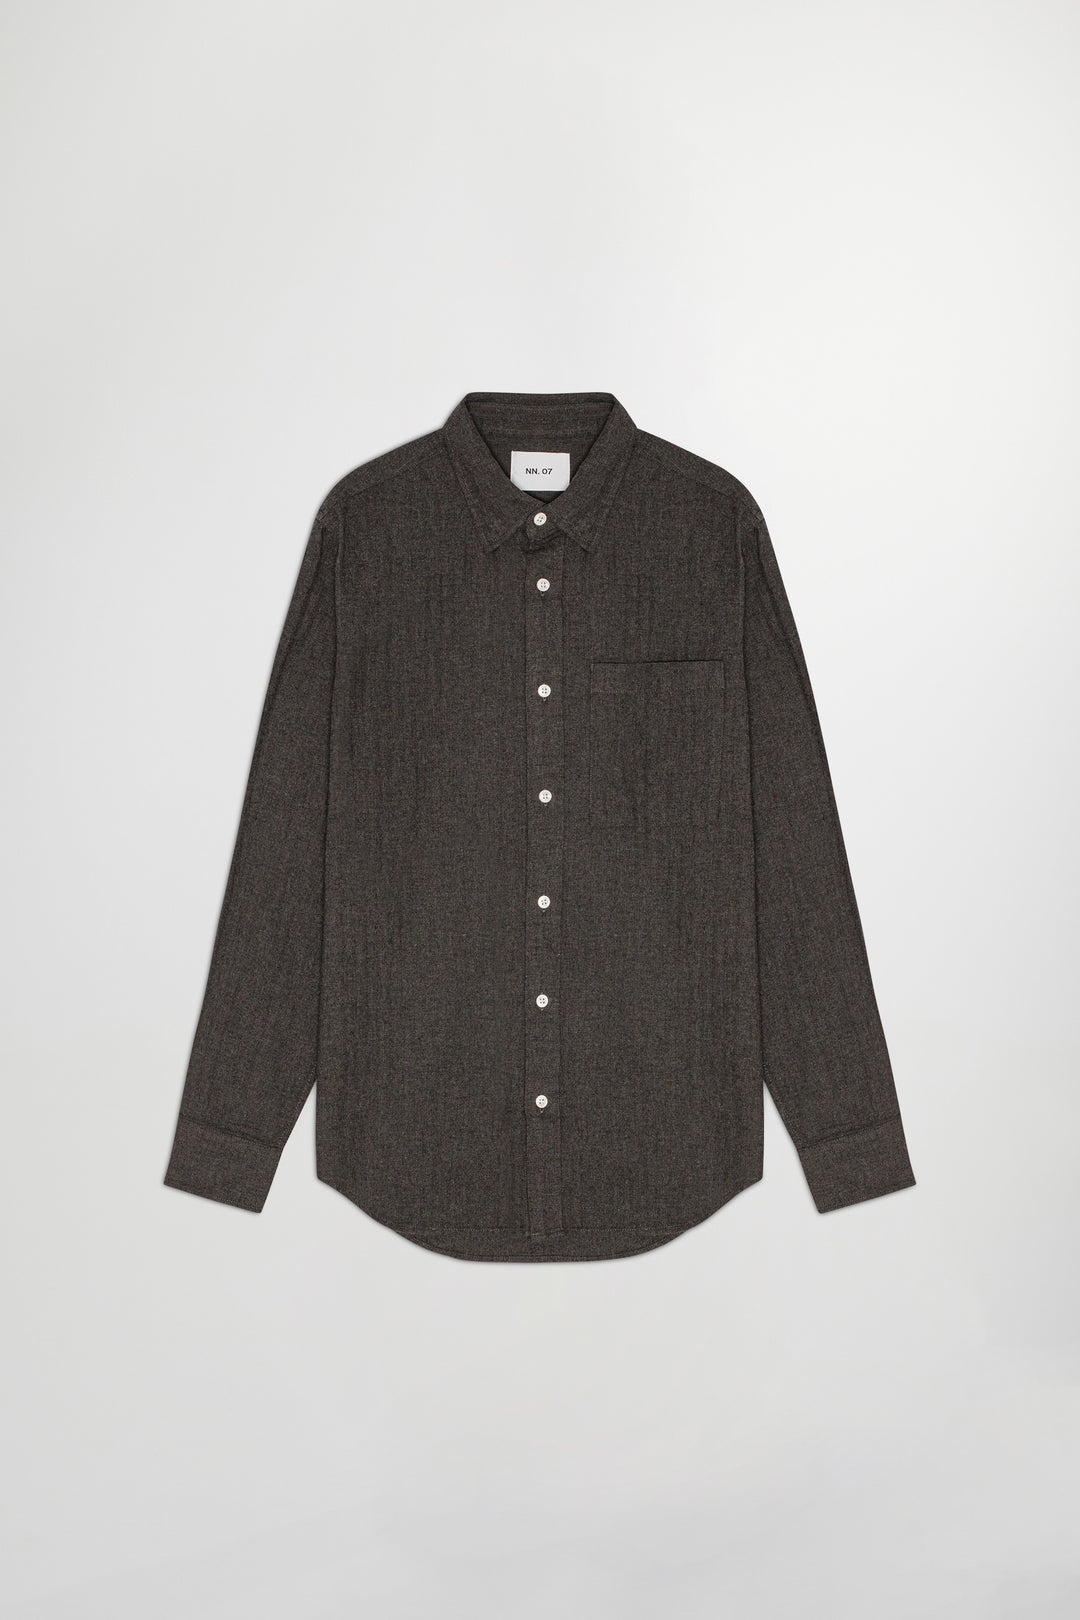 NN07 Cohen 5726 Long Sleeve Shirt in Sage Army | Buster McGee